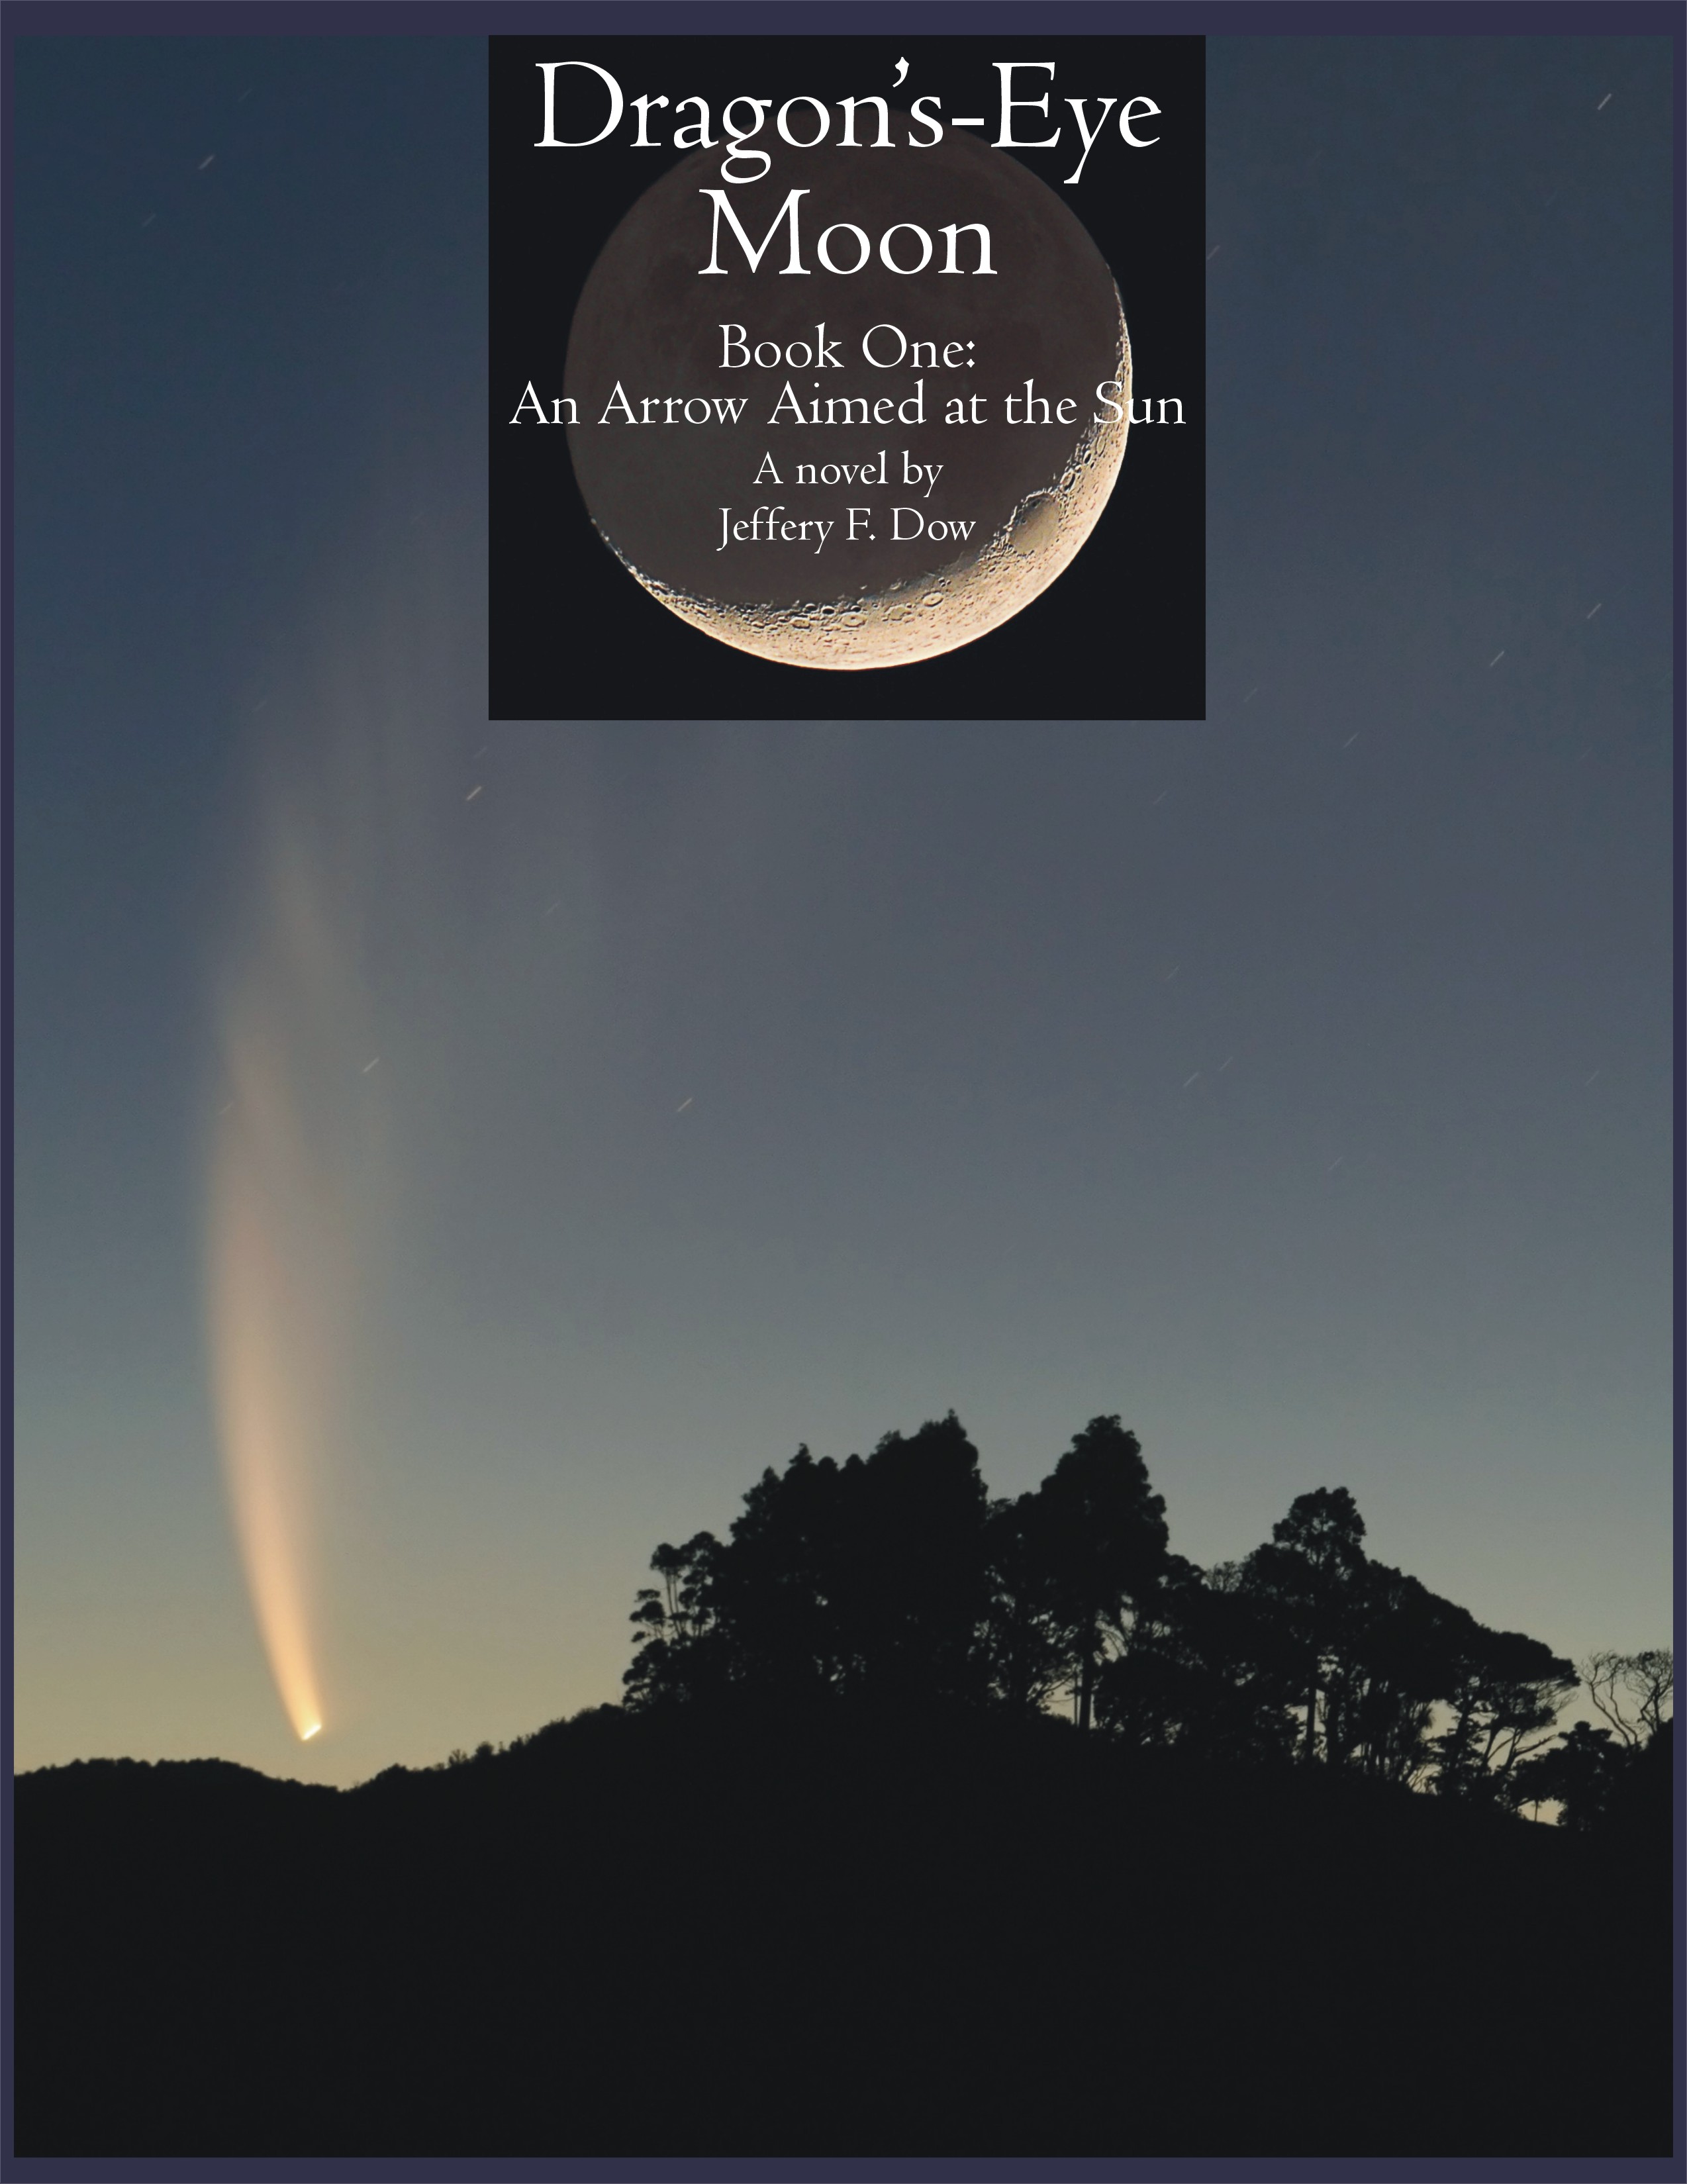 Cover of a book showing a dark tree in the foregound and a comet just above the horizon